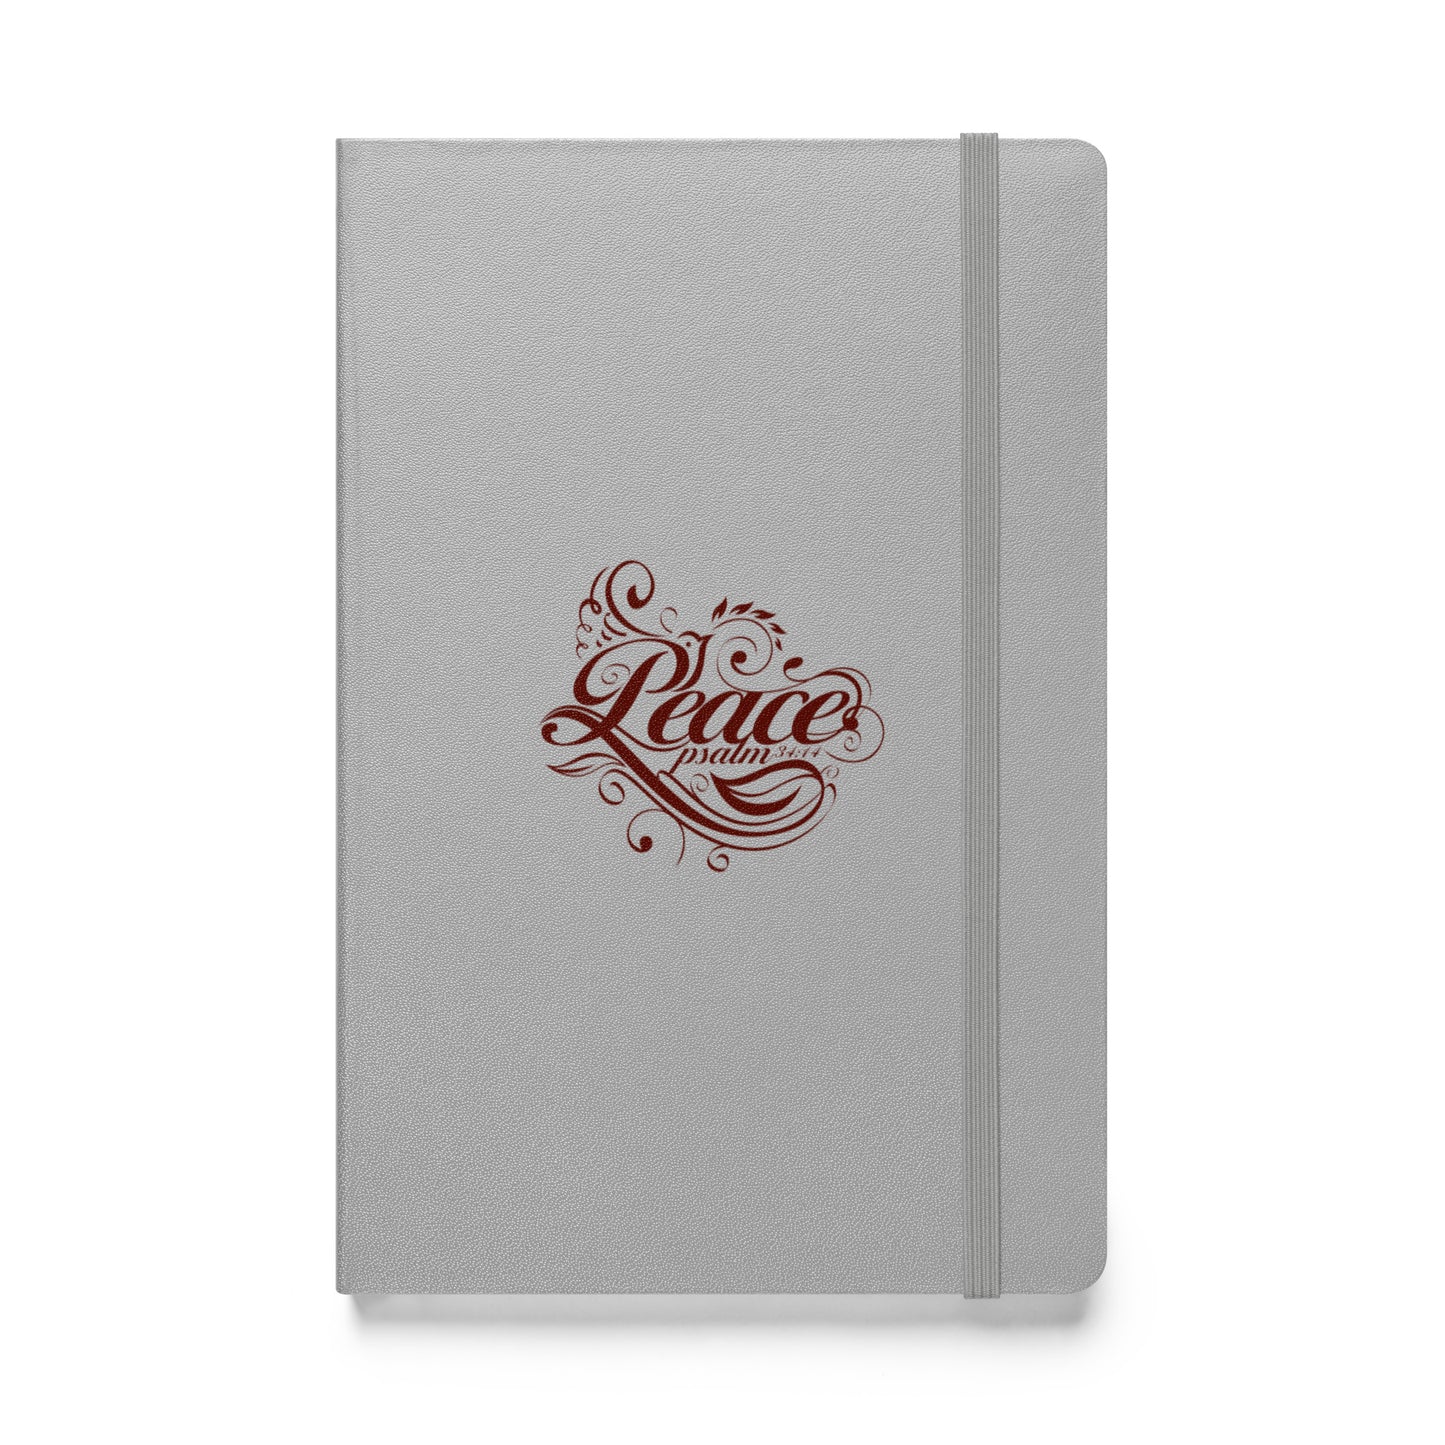 Peace - Hardcover bound notebook